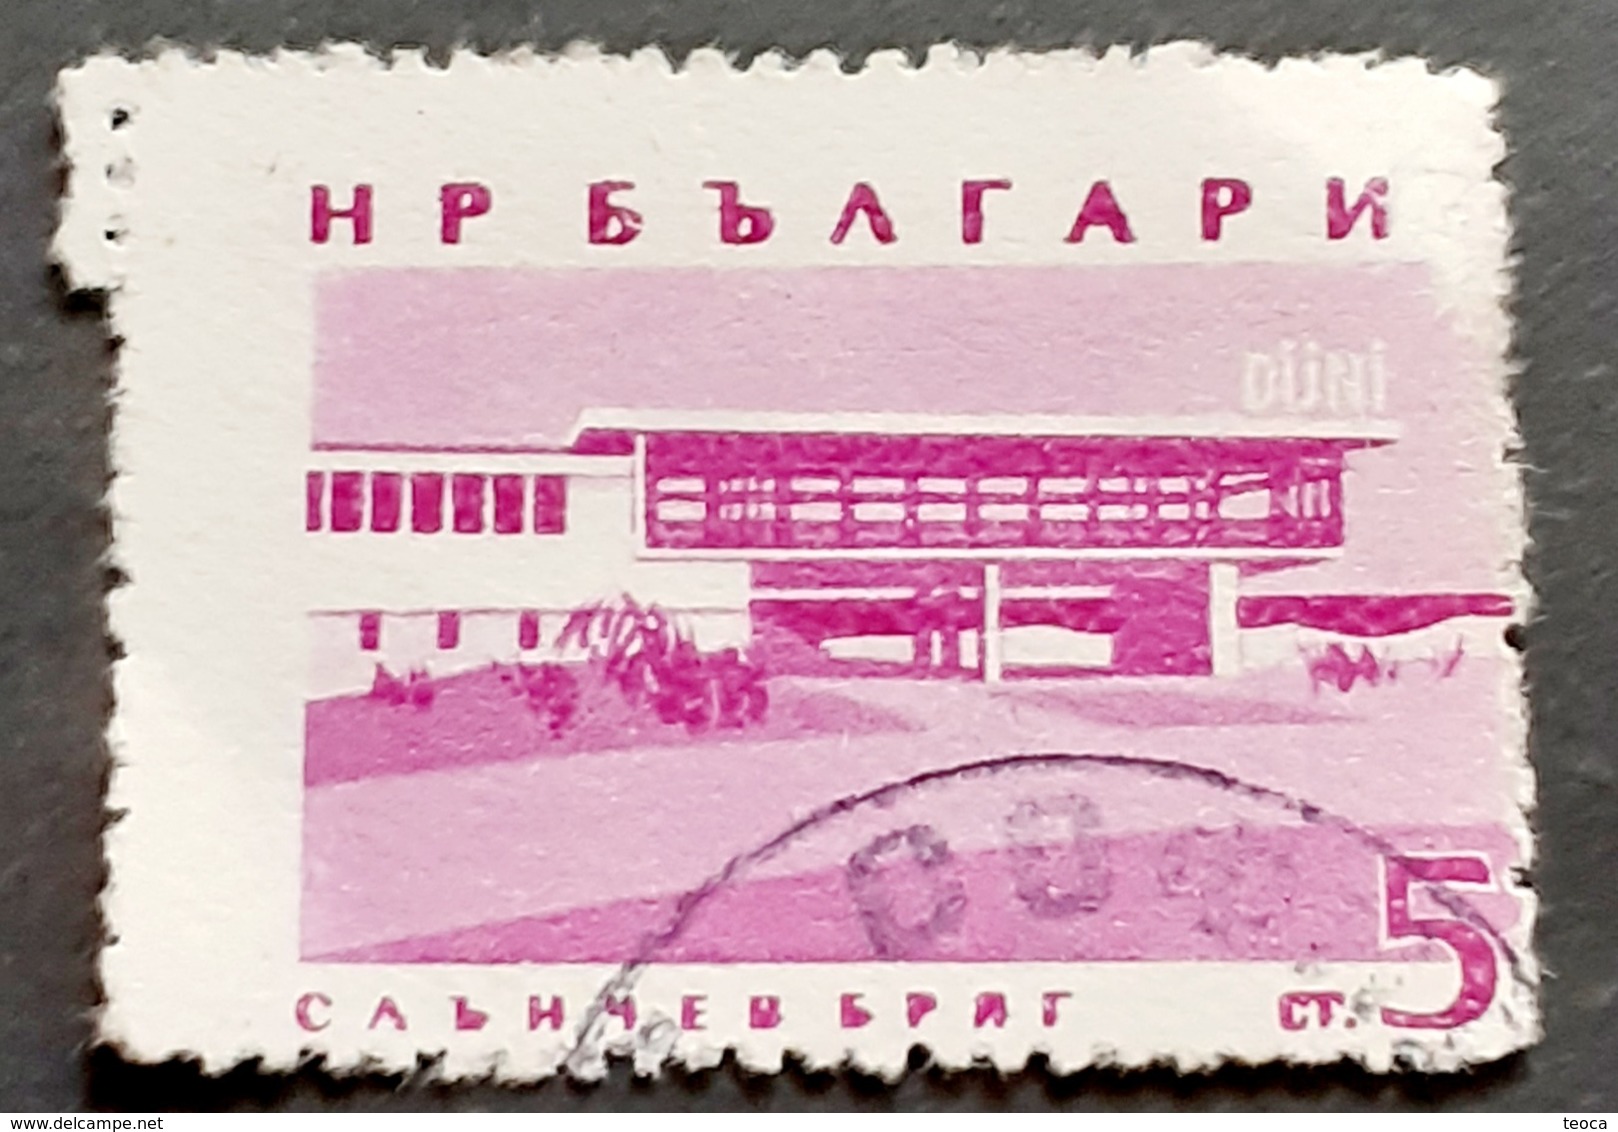 Stamps Errors BULGARIA 1963, WITH ERROR  PERFORATION MISPLACED IMAGE  USED - Errors, Freaks & Oddities (EFO)